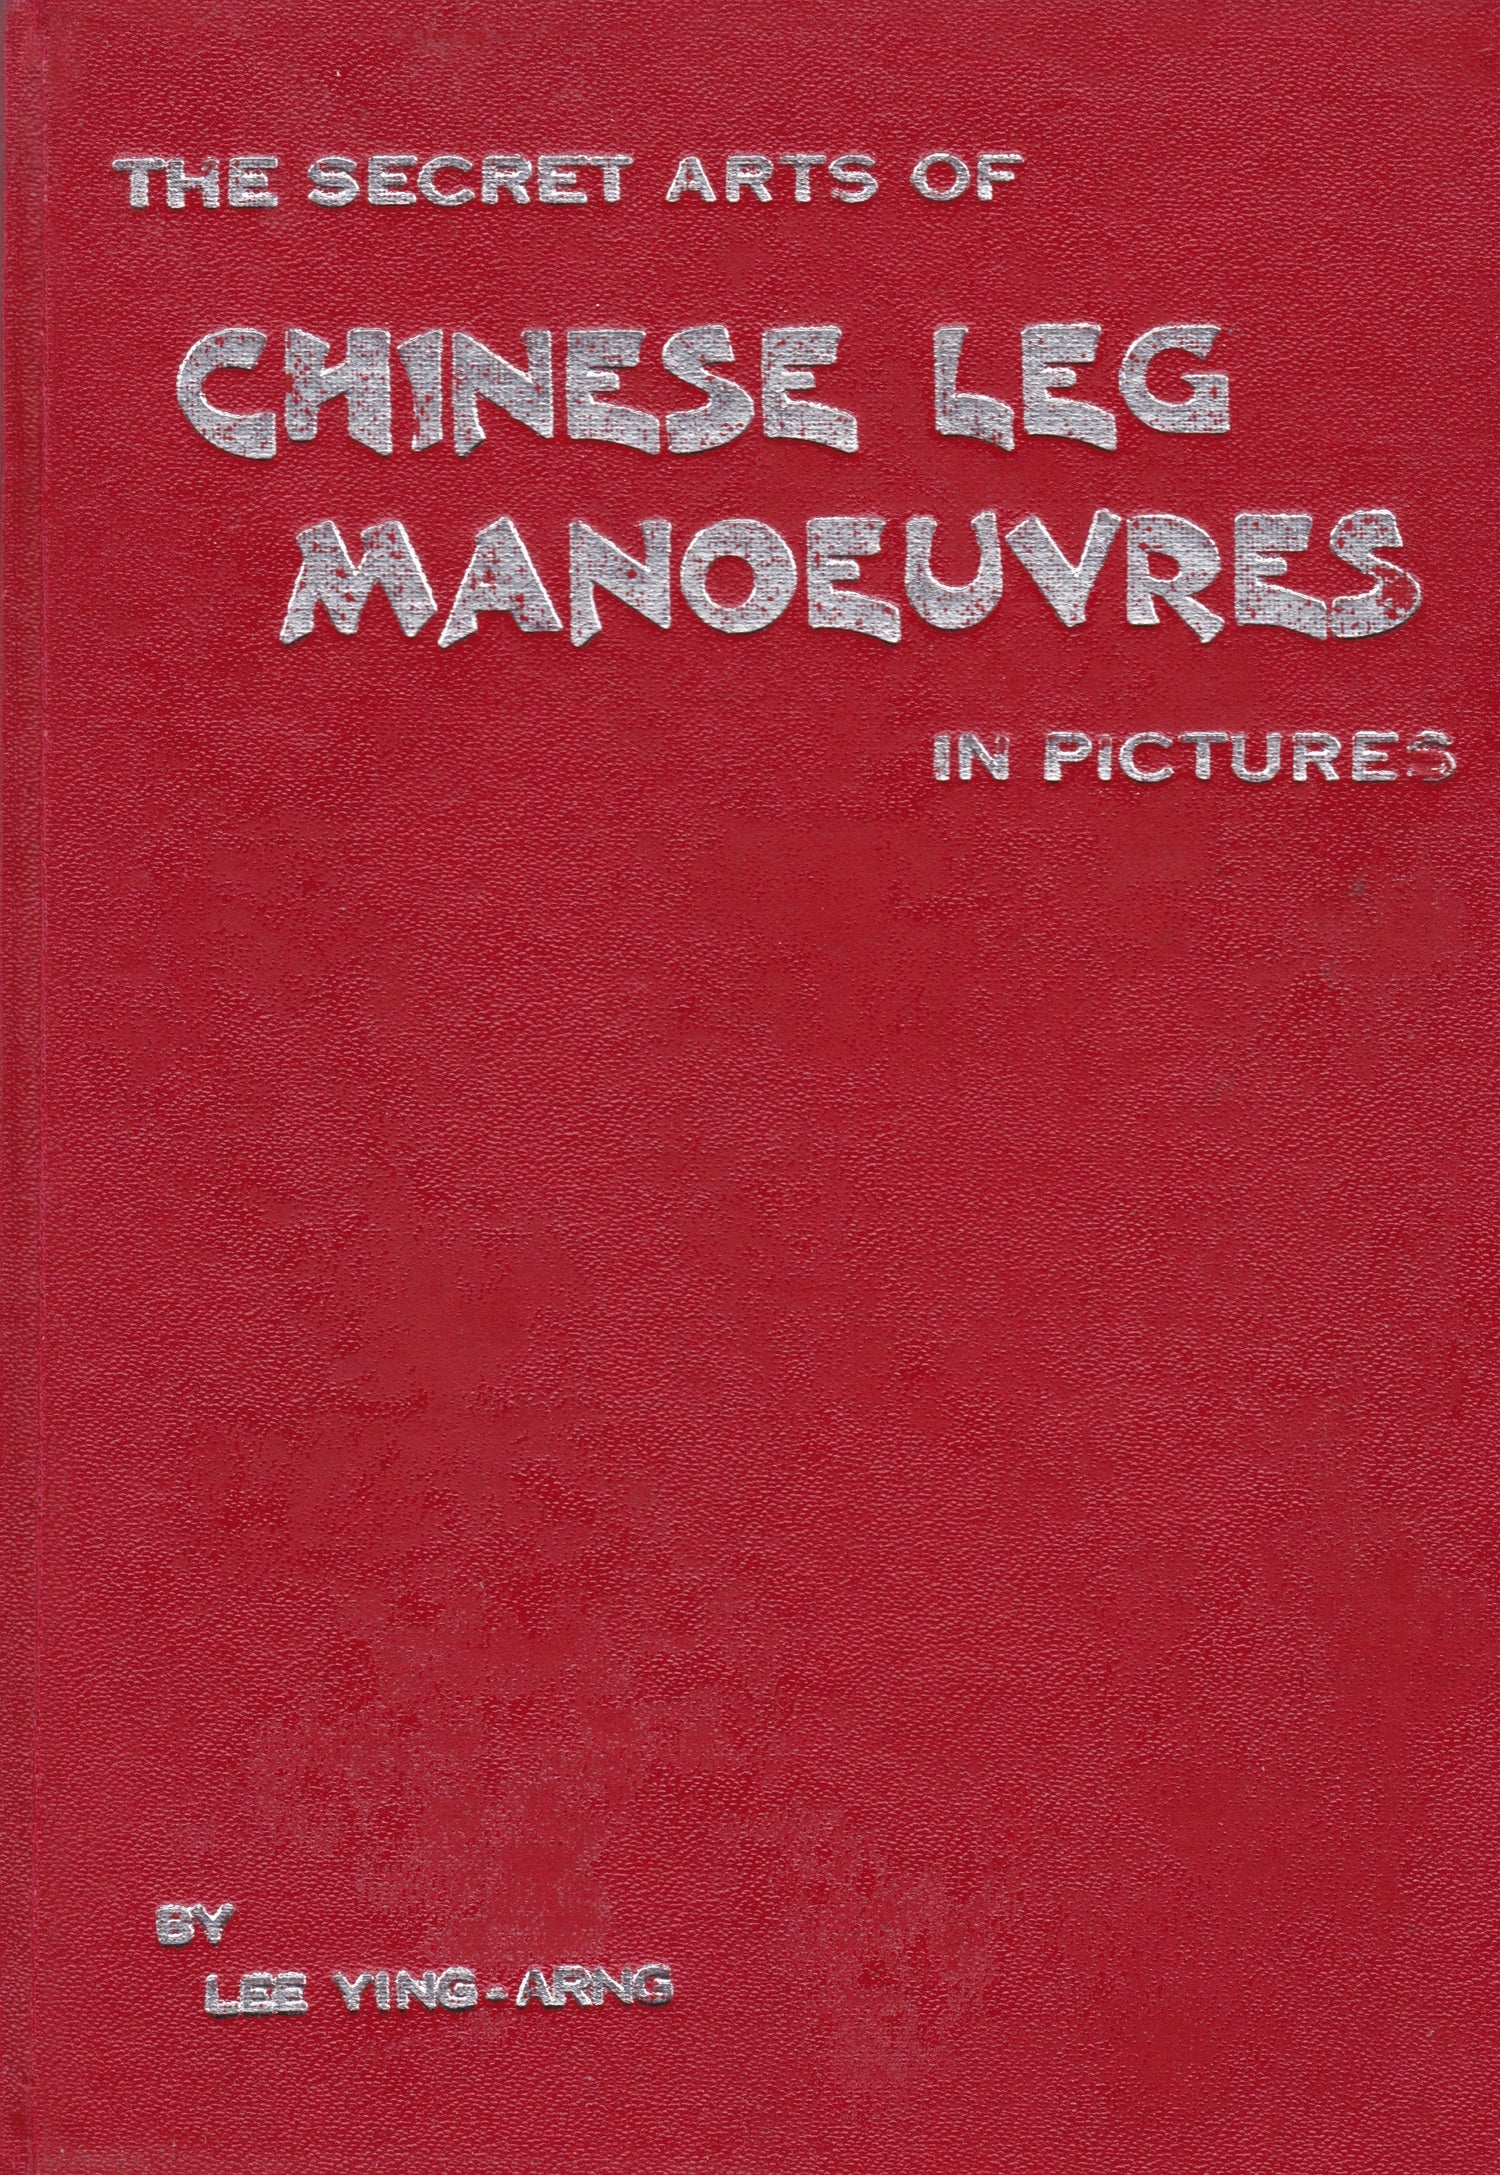 Secret Art of Chinese Leg Manoeuvres in Pictures Book by Ying-Arng Lee (Hardcover) (Preowned)